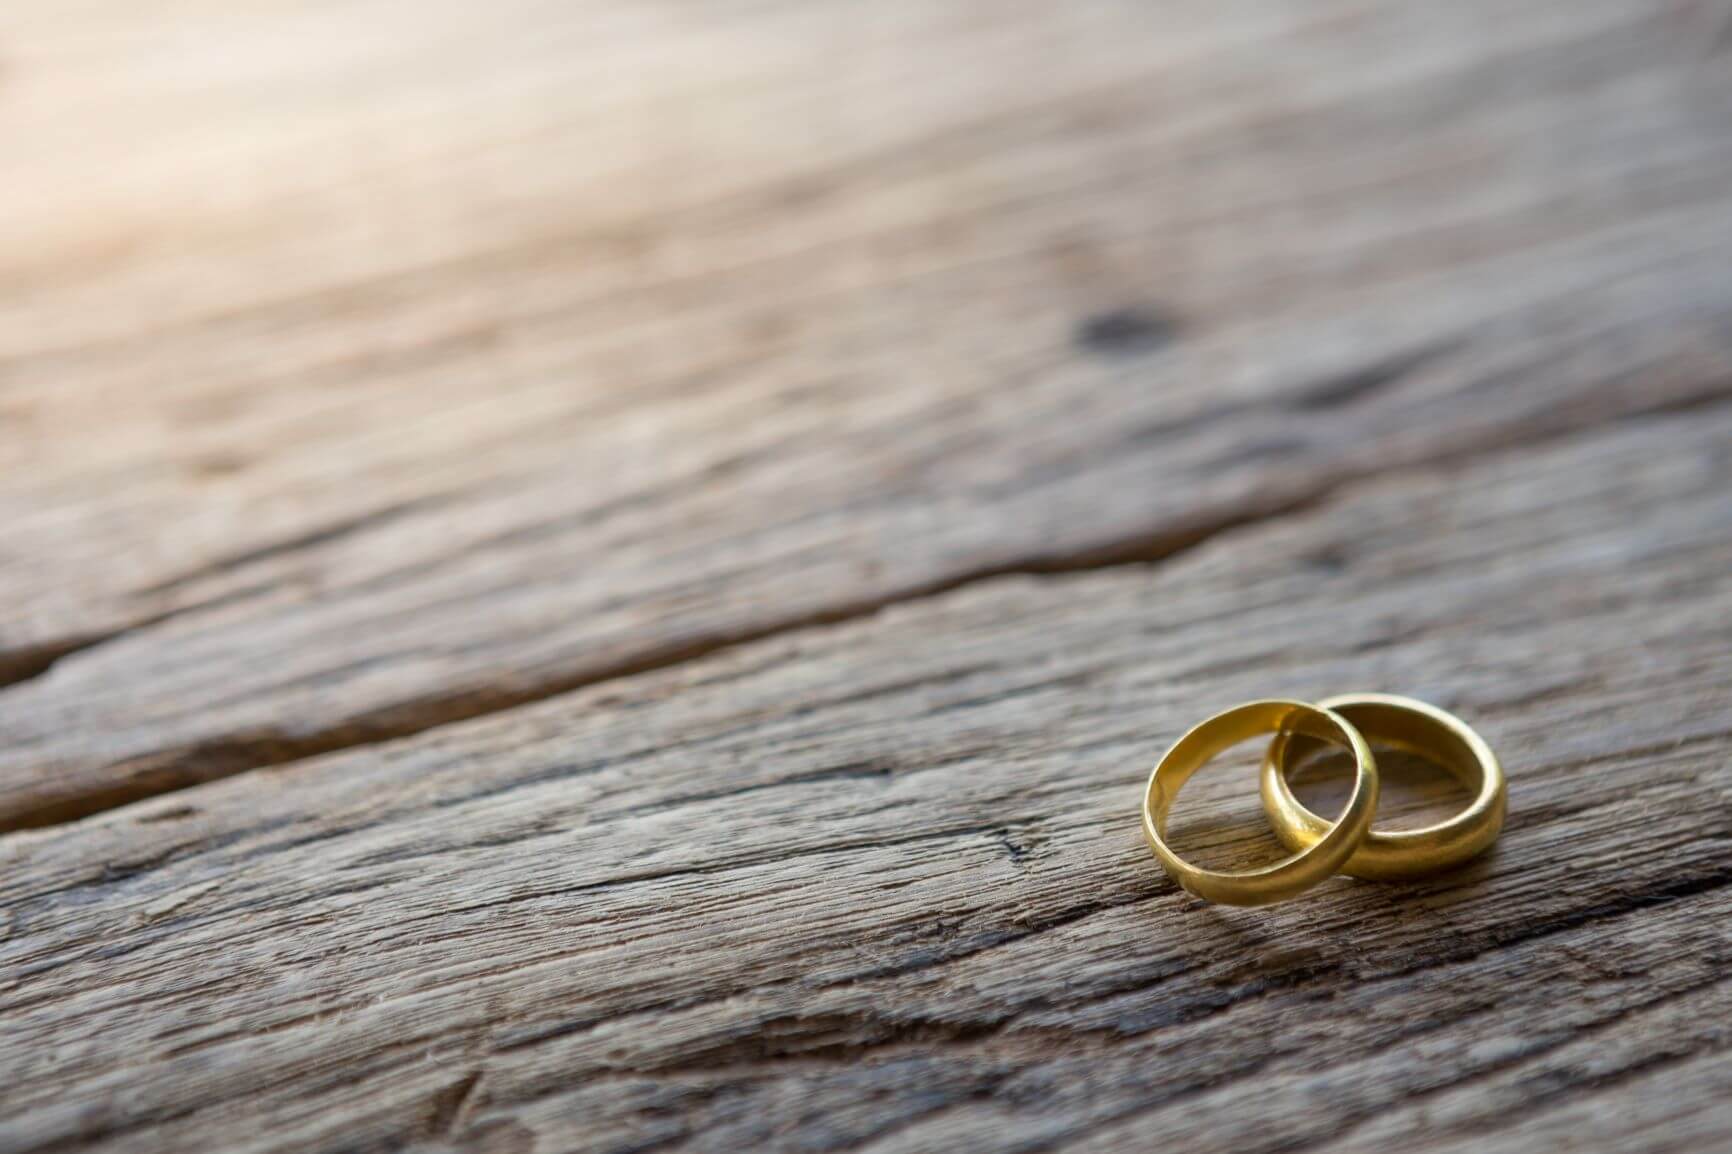 Why Consider Single Mine Origin Gold For Your Wedding Ring?